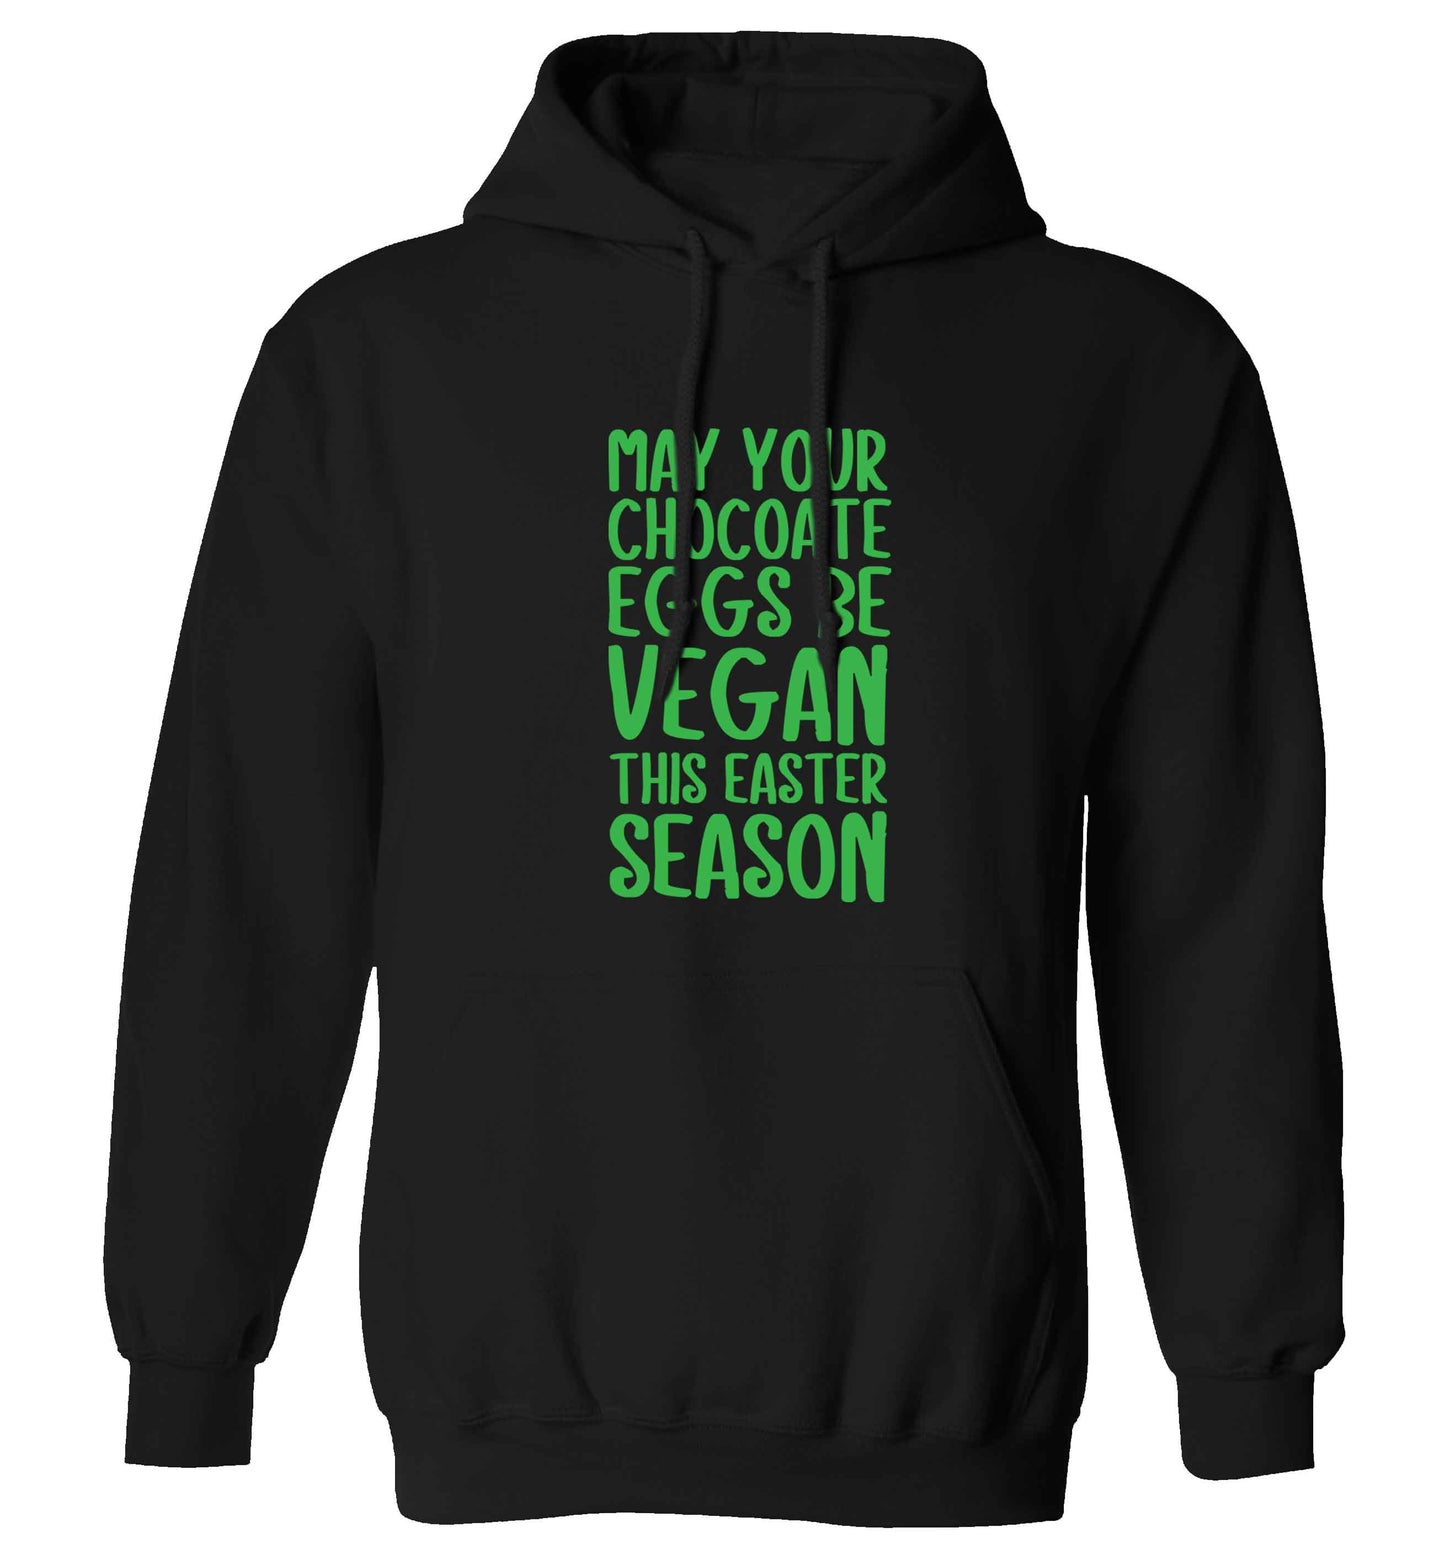 Easter bunny approved! Vegans will love this easter themed adults unisex black hoodie 2XL